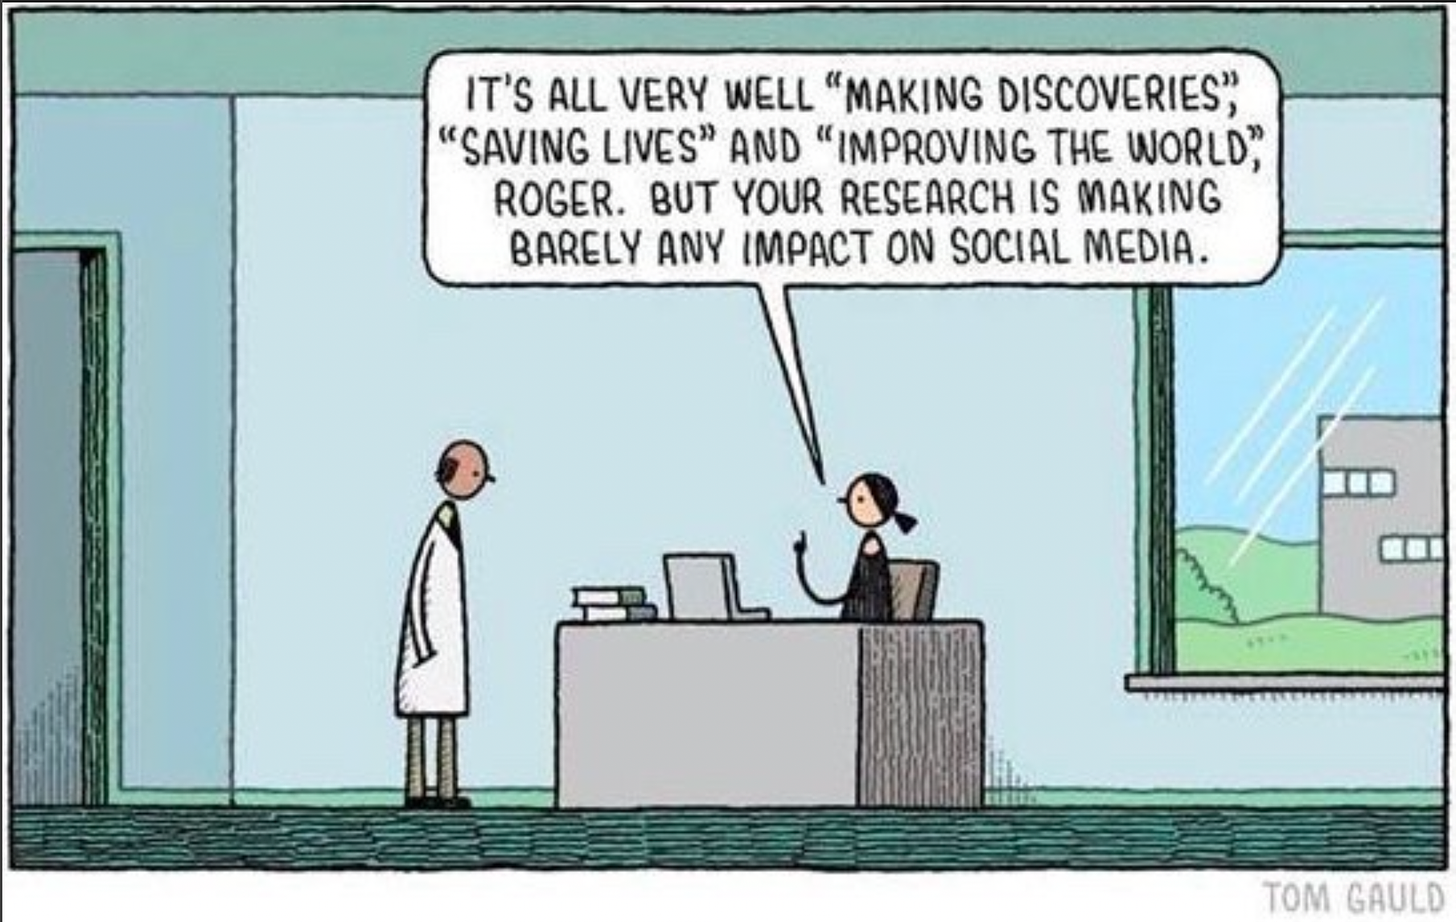 Comic depicting a male scientist in a white lab coat looking at a woman behind a computer at a large desk says: IT'S ALL VERY WELL “MAKING DISCOVERIES, - “SAVING LIVES" AND “IMPROVING THE WORLD," ROGER. BUT YOUR RESEARCH IS MAKING BARELY ANY IMPACT ON SOCIAL MEDIA.